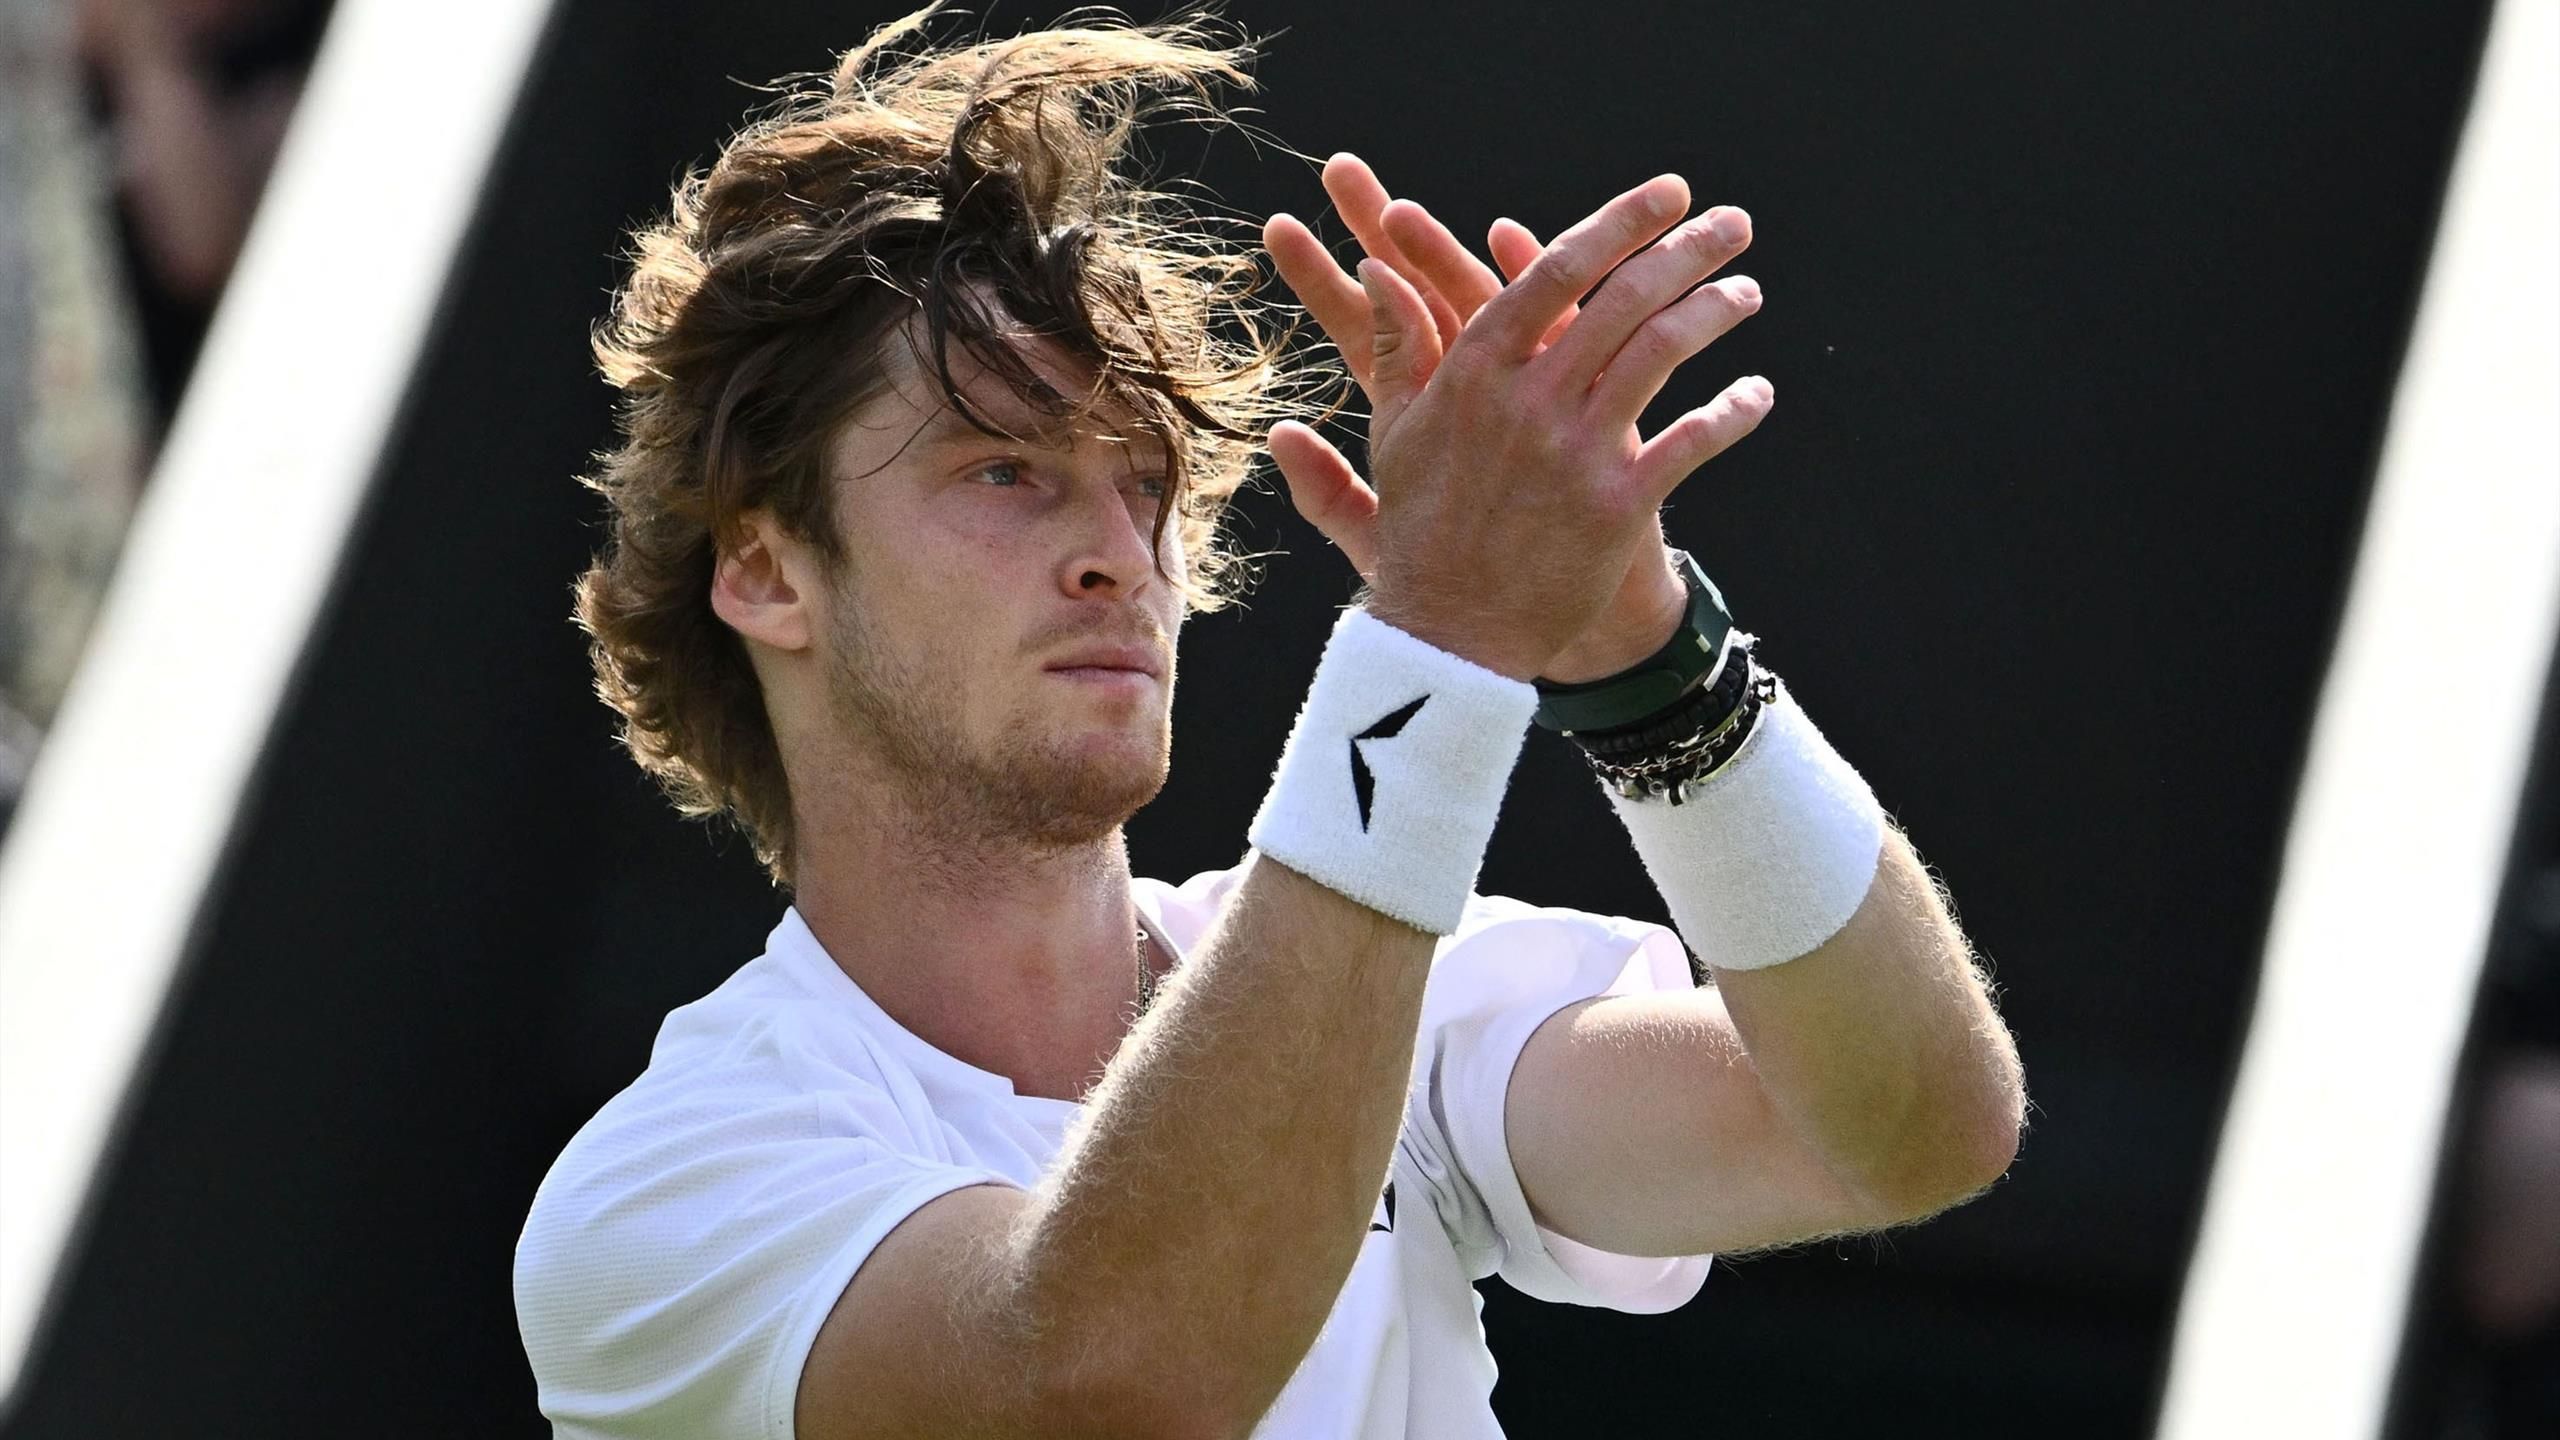 Wimbledon 2023 Andrey Rublev, Alexander Zverev and Matteo Berrettini among winners on packed Day 4 at SW19